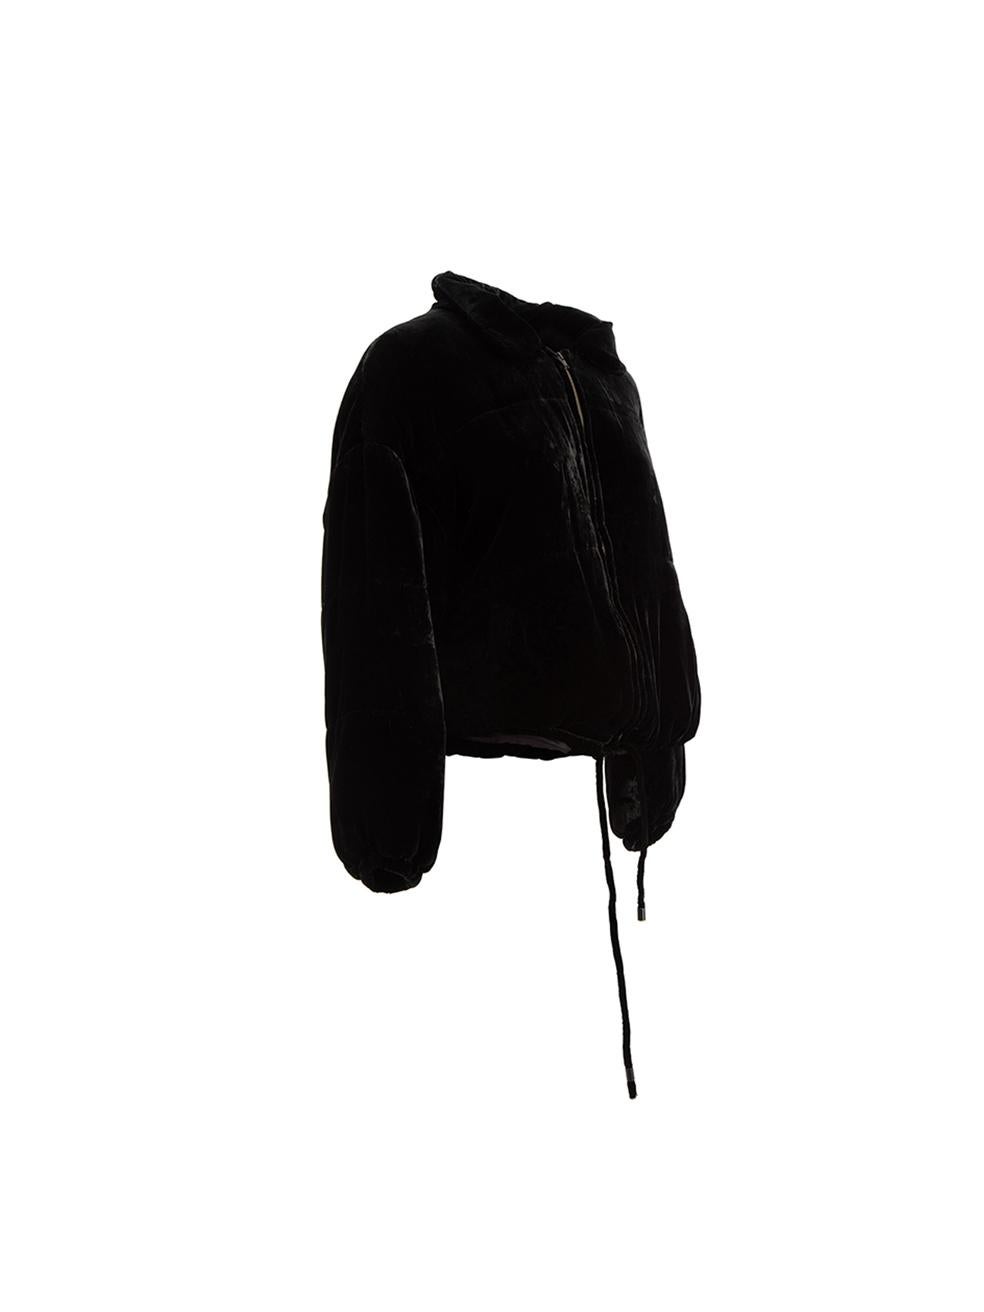 CONDITION is Very good. Minimal wear to jacket is evident. Minimal wear to the velvet exterior which attracts fluff on this used Isabel Marant designer resale item.   Details  Black Velvet Puffer jacket Short length Two ways zip front closure Front